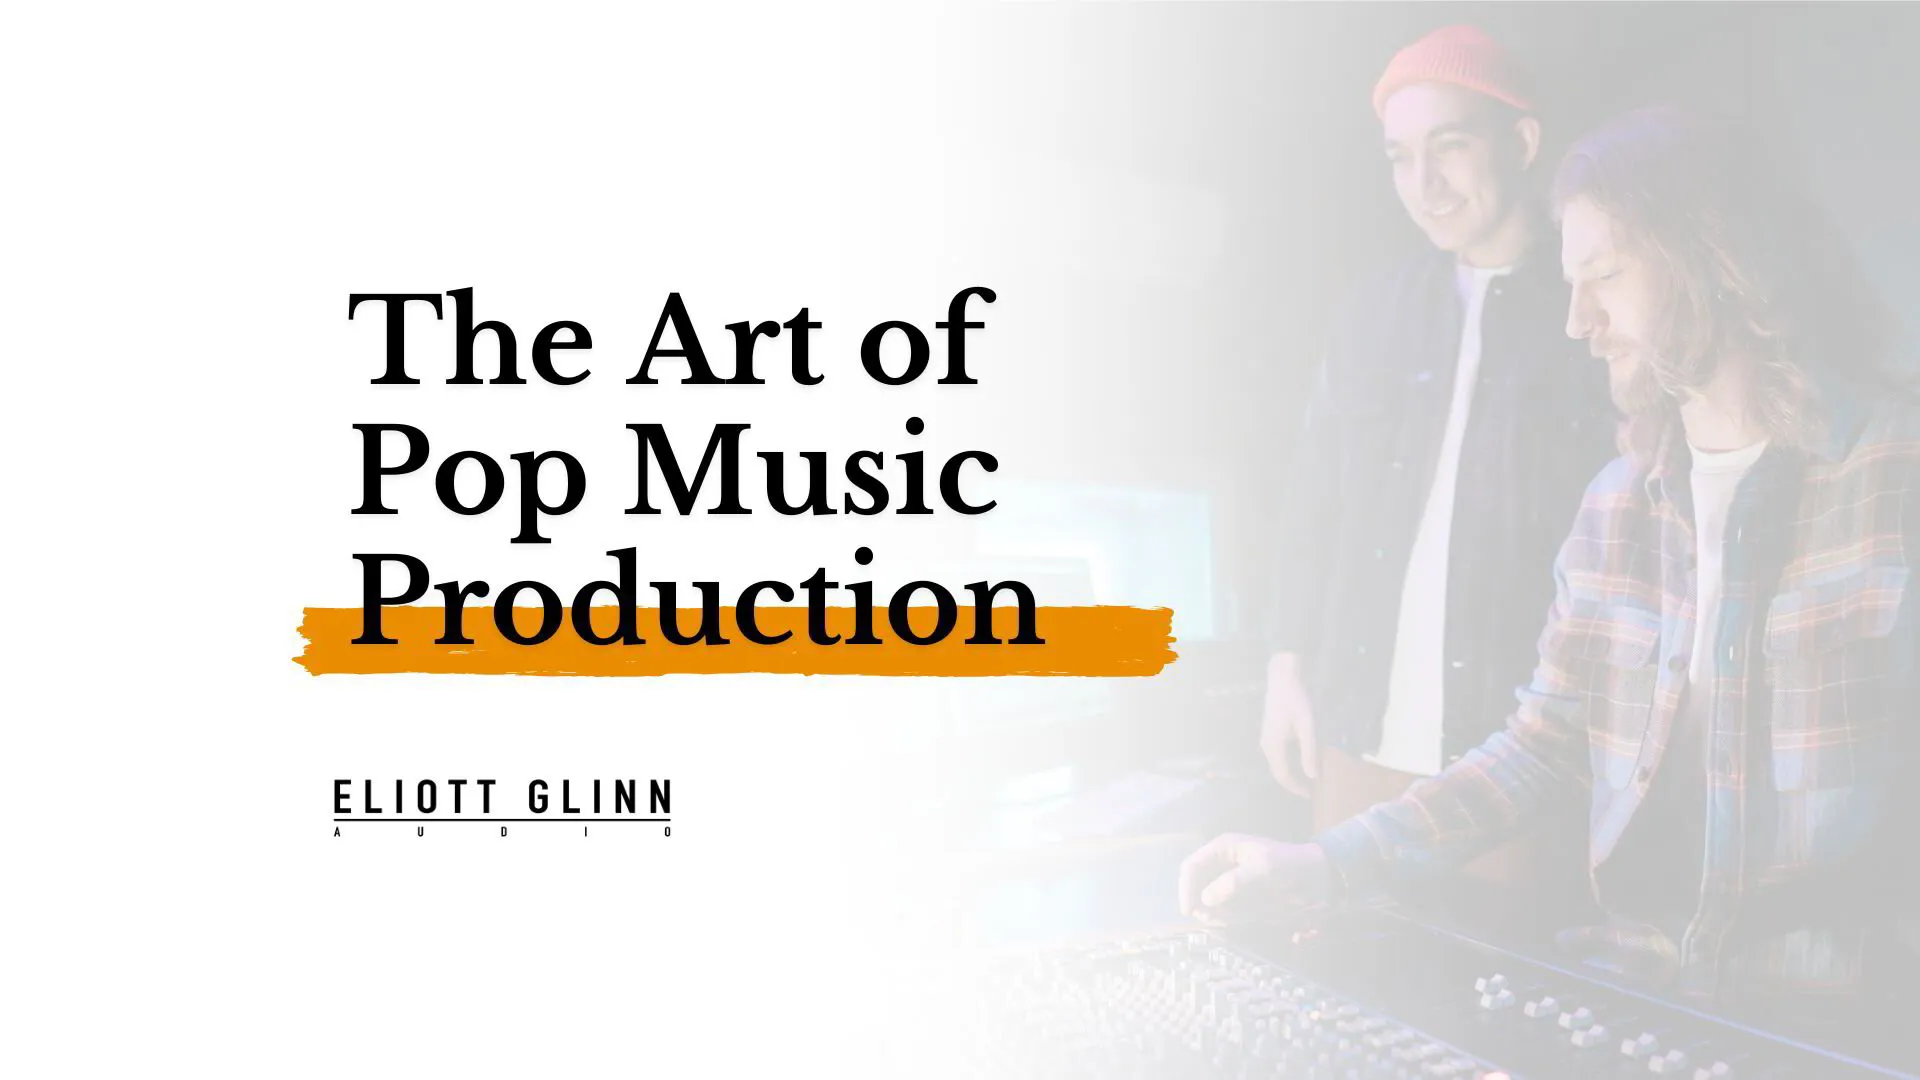 The Art of Pop Music Production